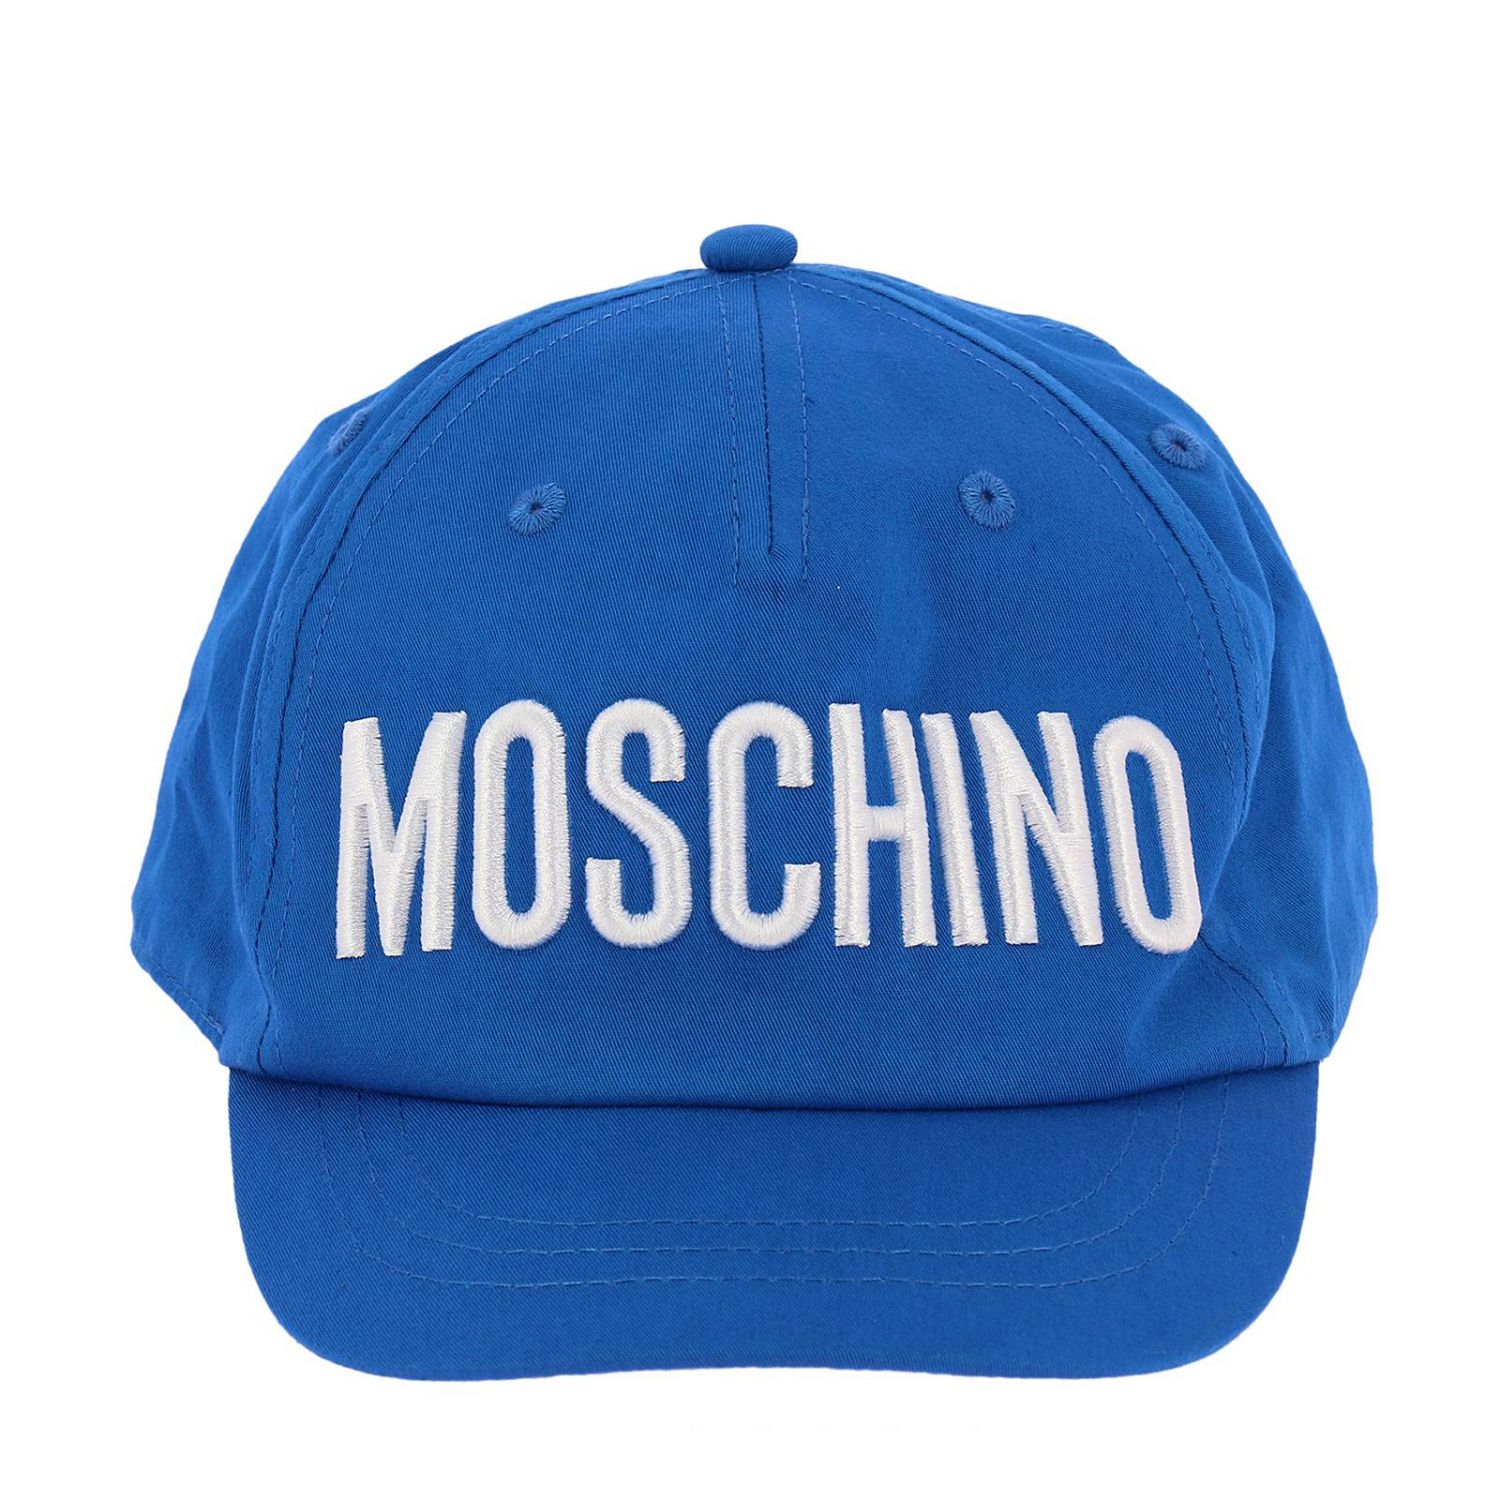 Moschino Kid Outlet: Hat kids - Royal Blue | Hat Moschino Kid HOX001 ...